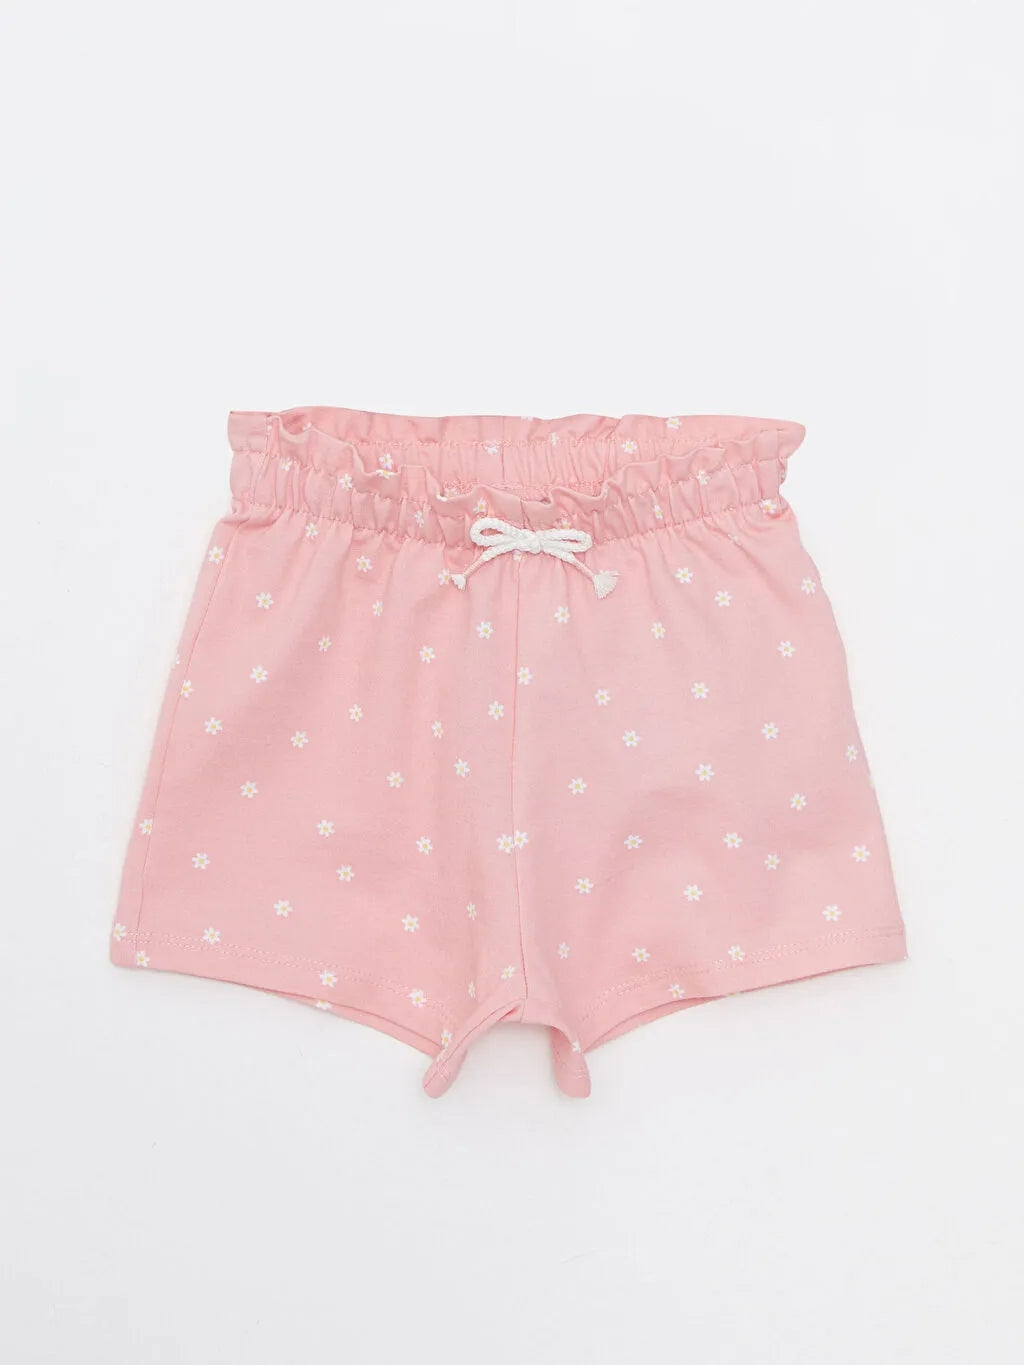 Baby Girl Shorts With Elastic Waist Cotton